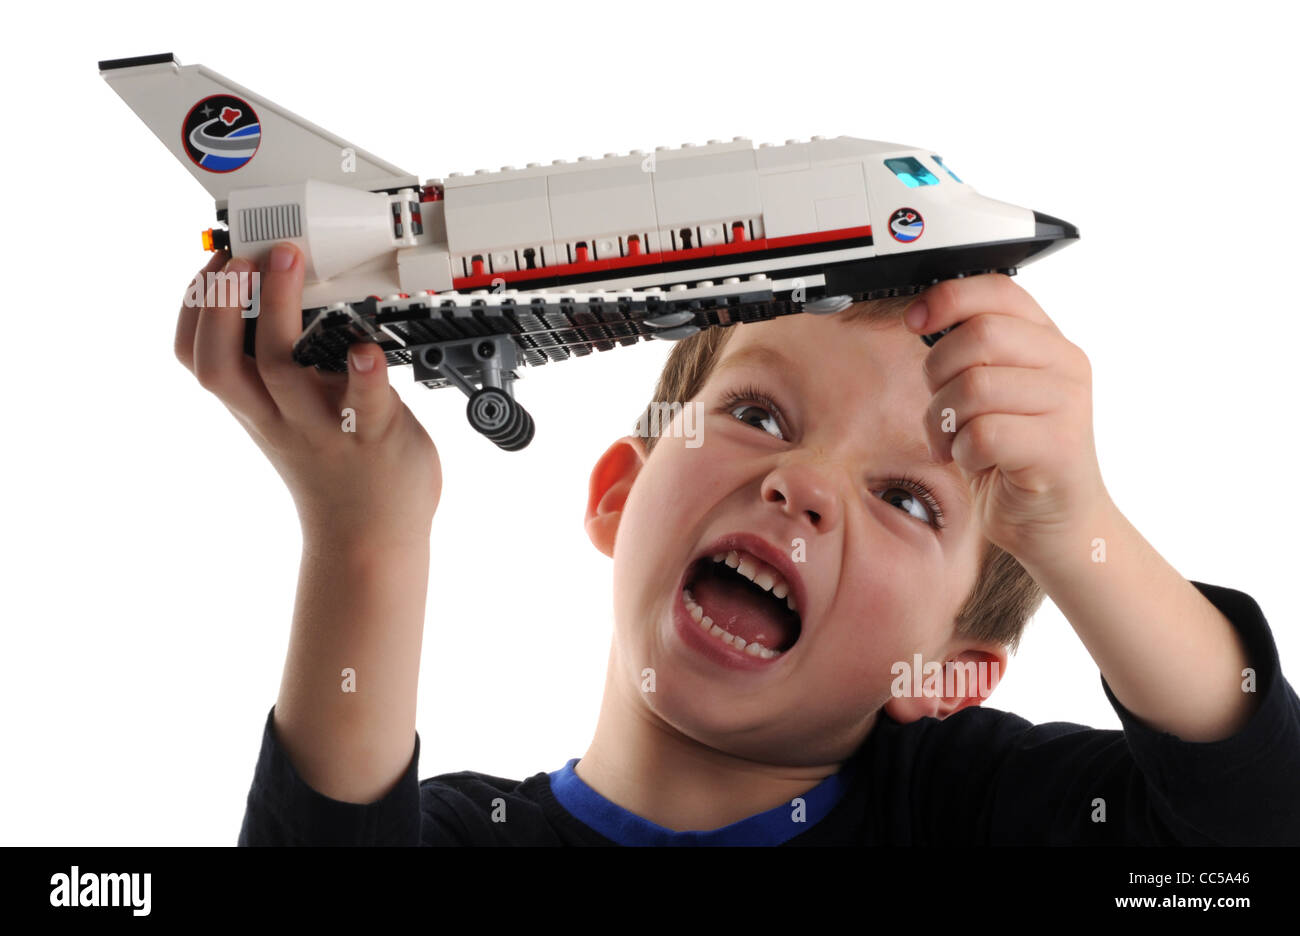 Lego, child playing with Lego space shuttle Stock Photo